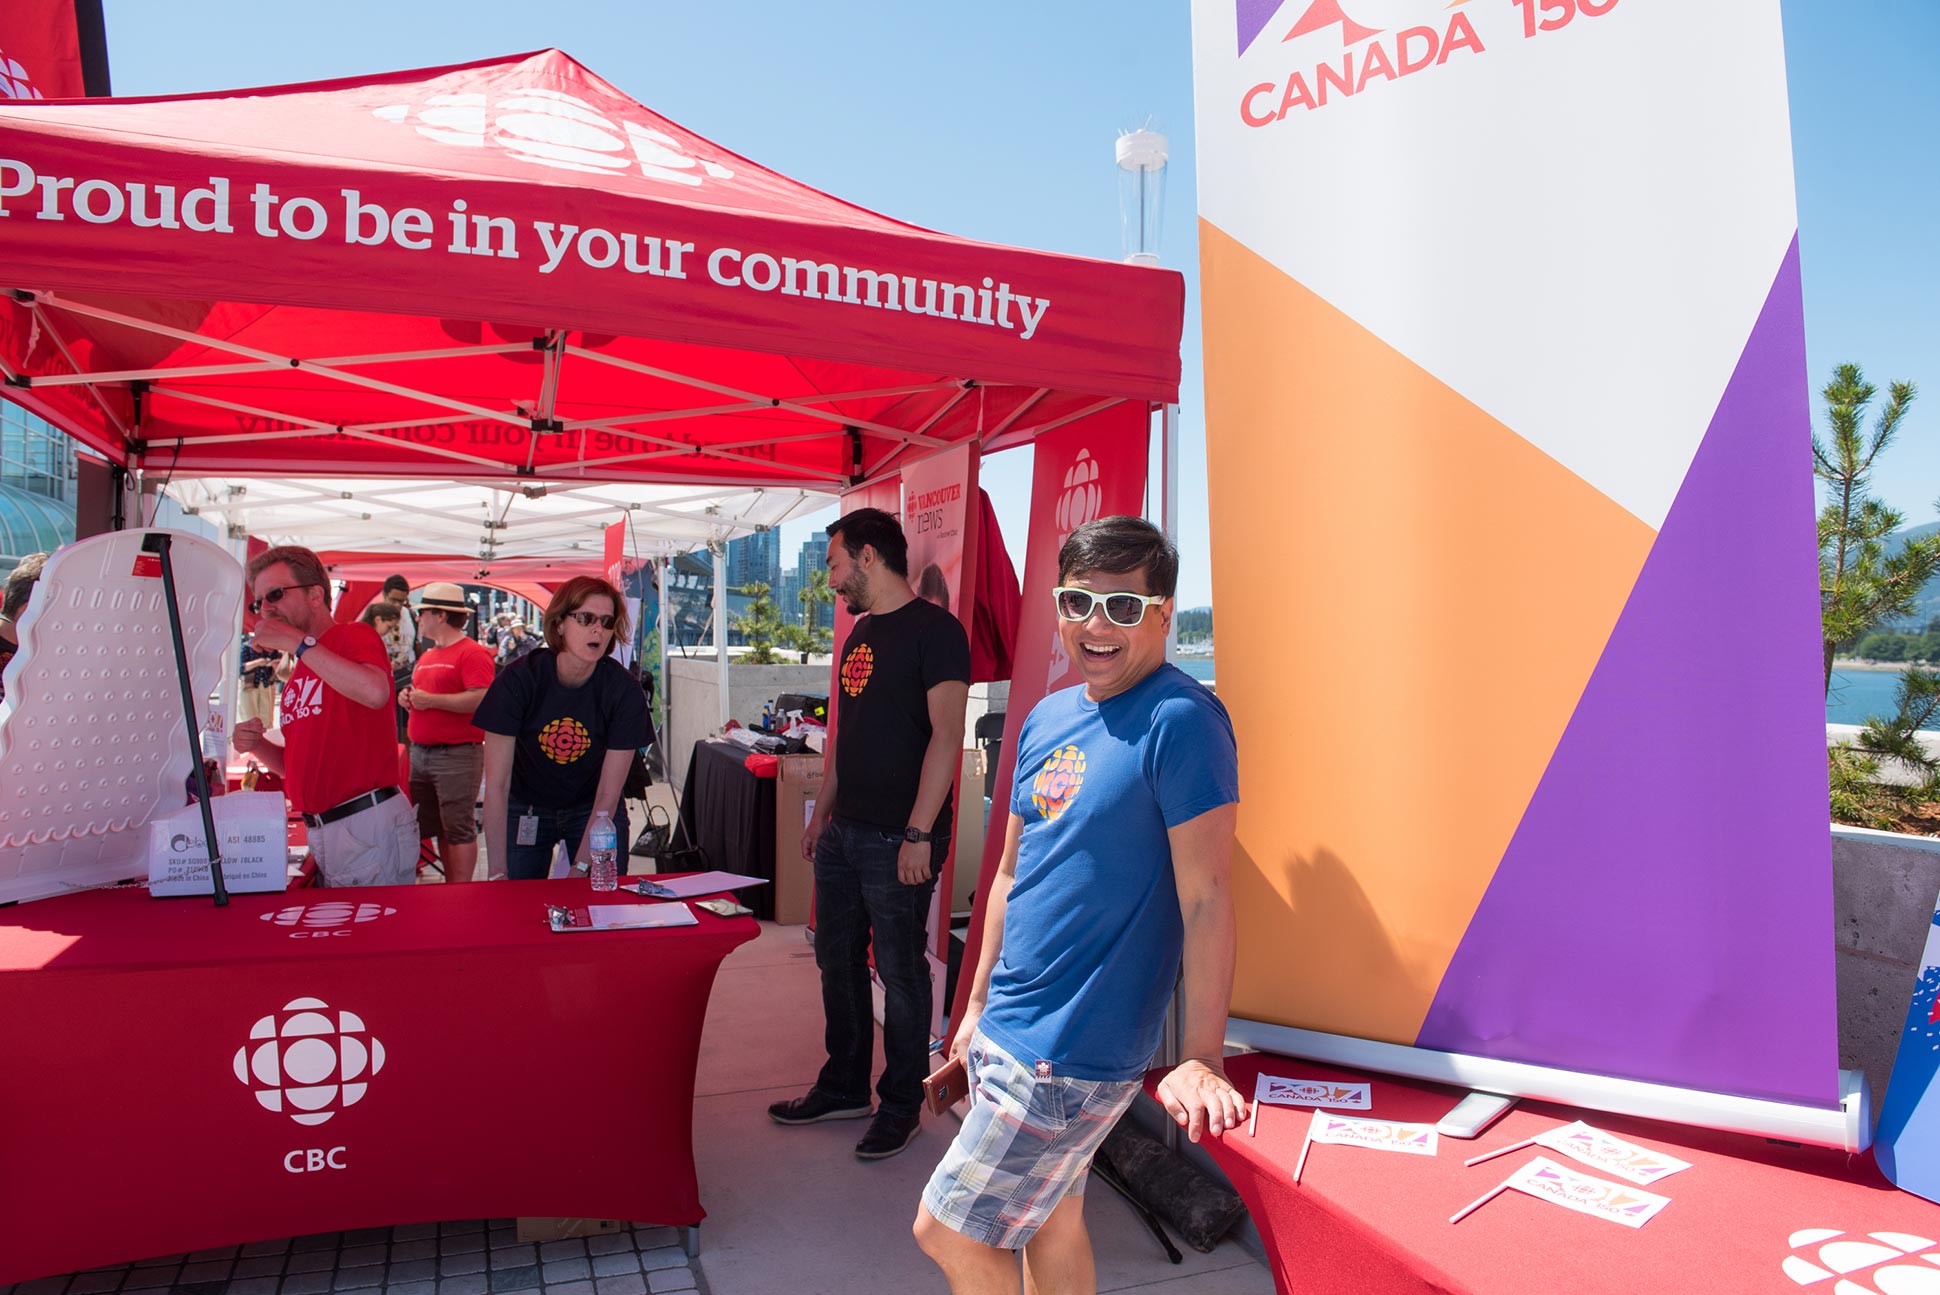 CBC ambassadors under the CBC tent on Canada Day 2017 in Vancouver.